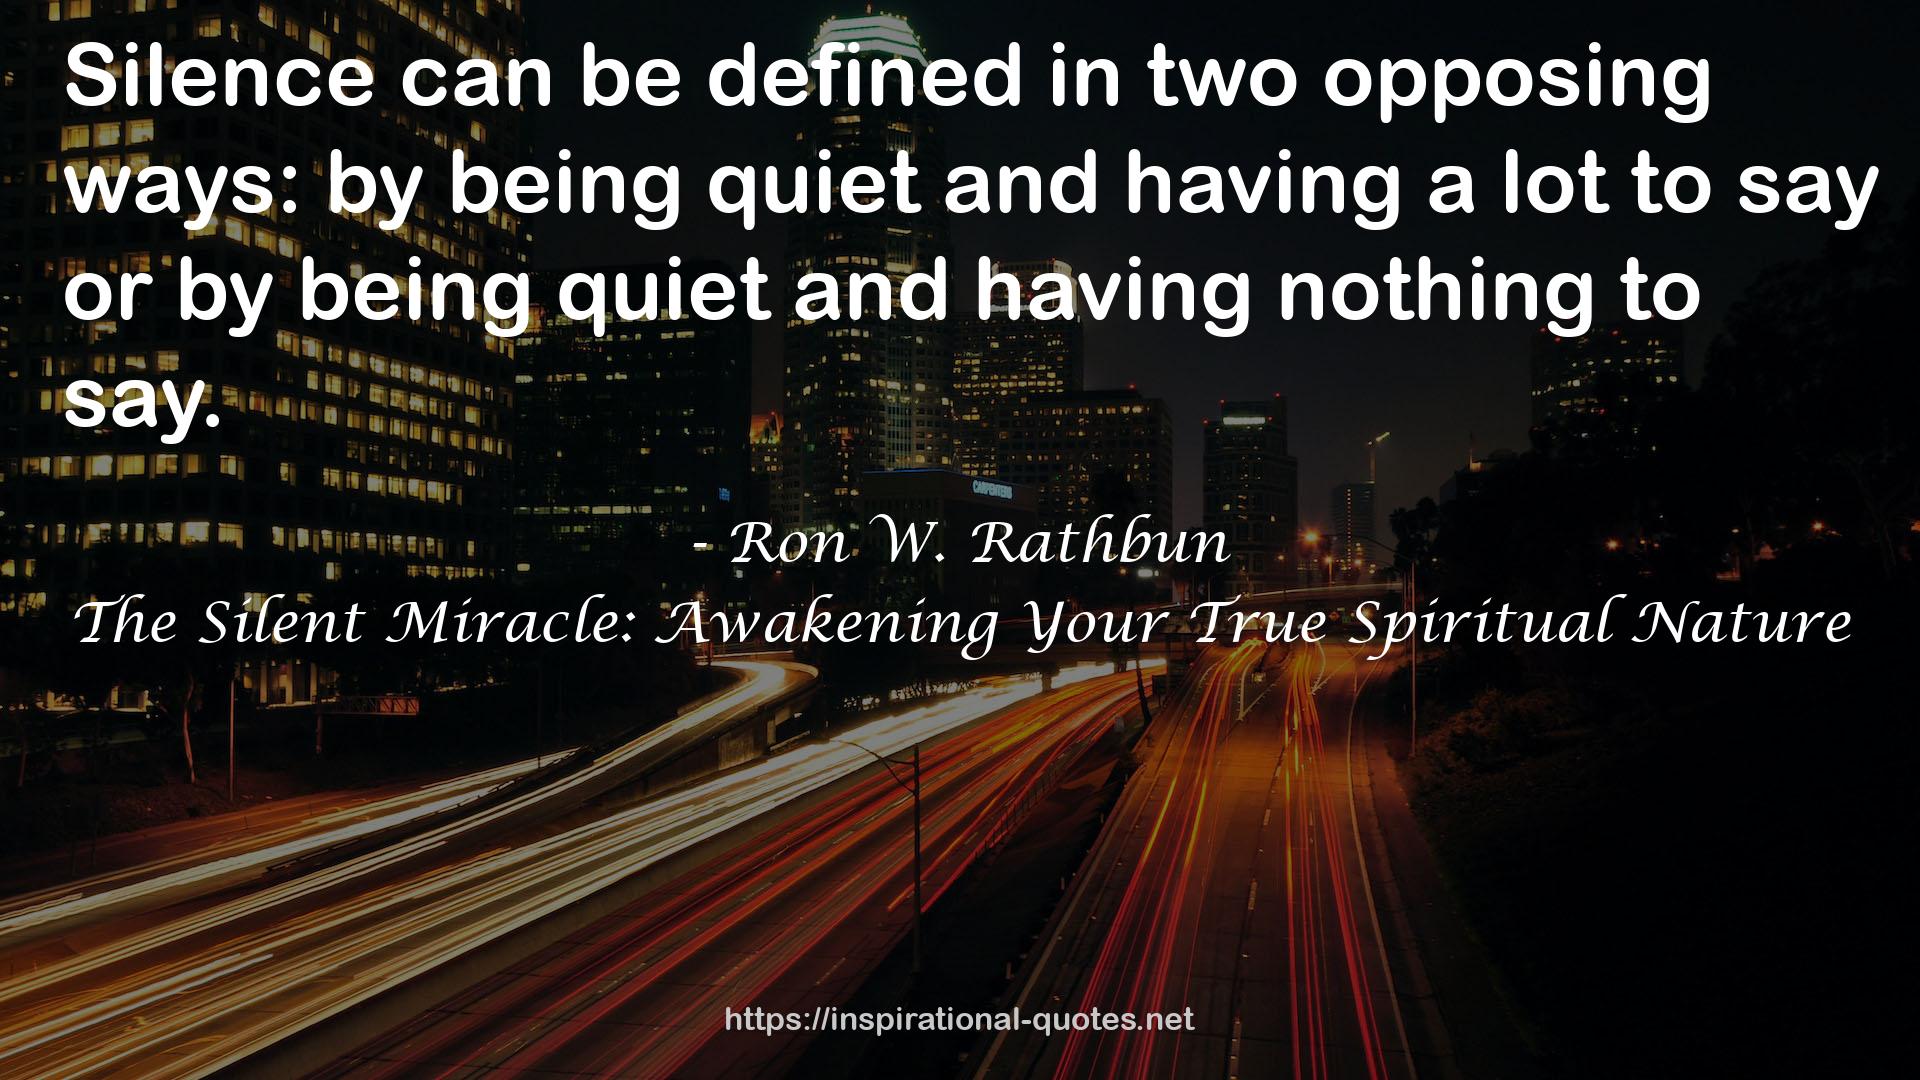 The Silent Miracle: Awakening Your True Spiritual Nature QUOTES